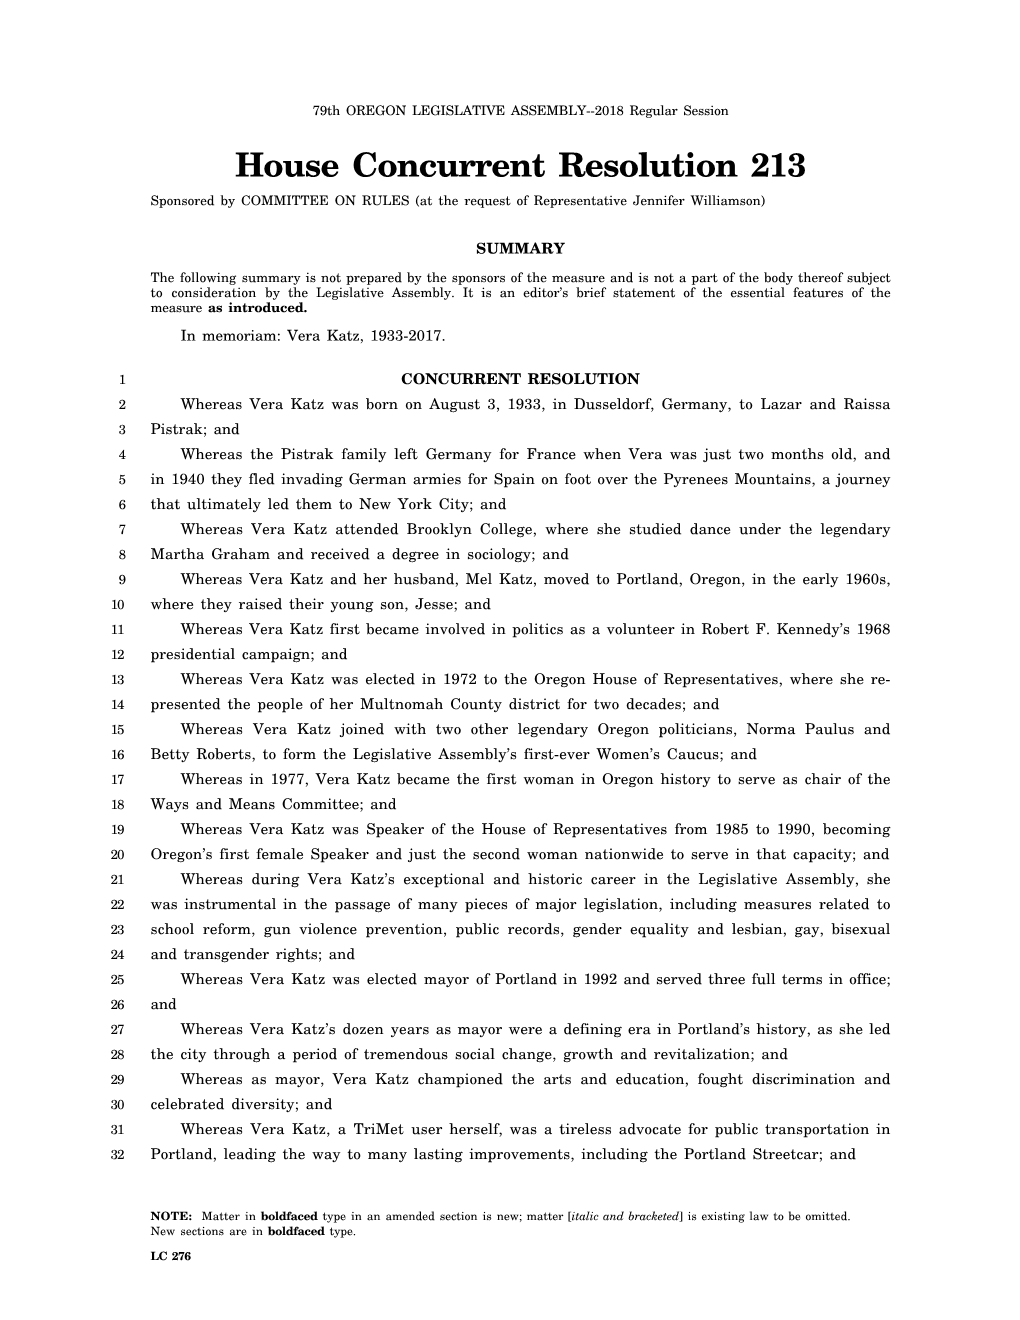 House Concurrent Resolution 213 Sponsored by COMMITTEE on RULES (At the Request of Representative Jennifer Williamson)